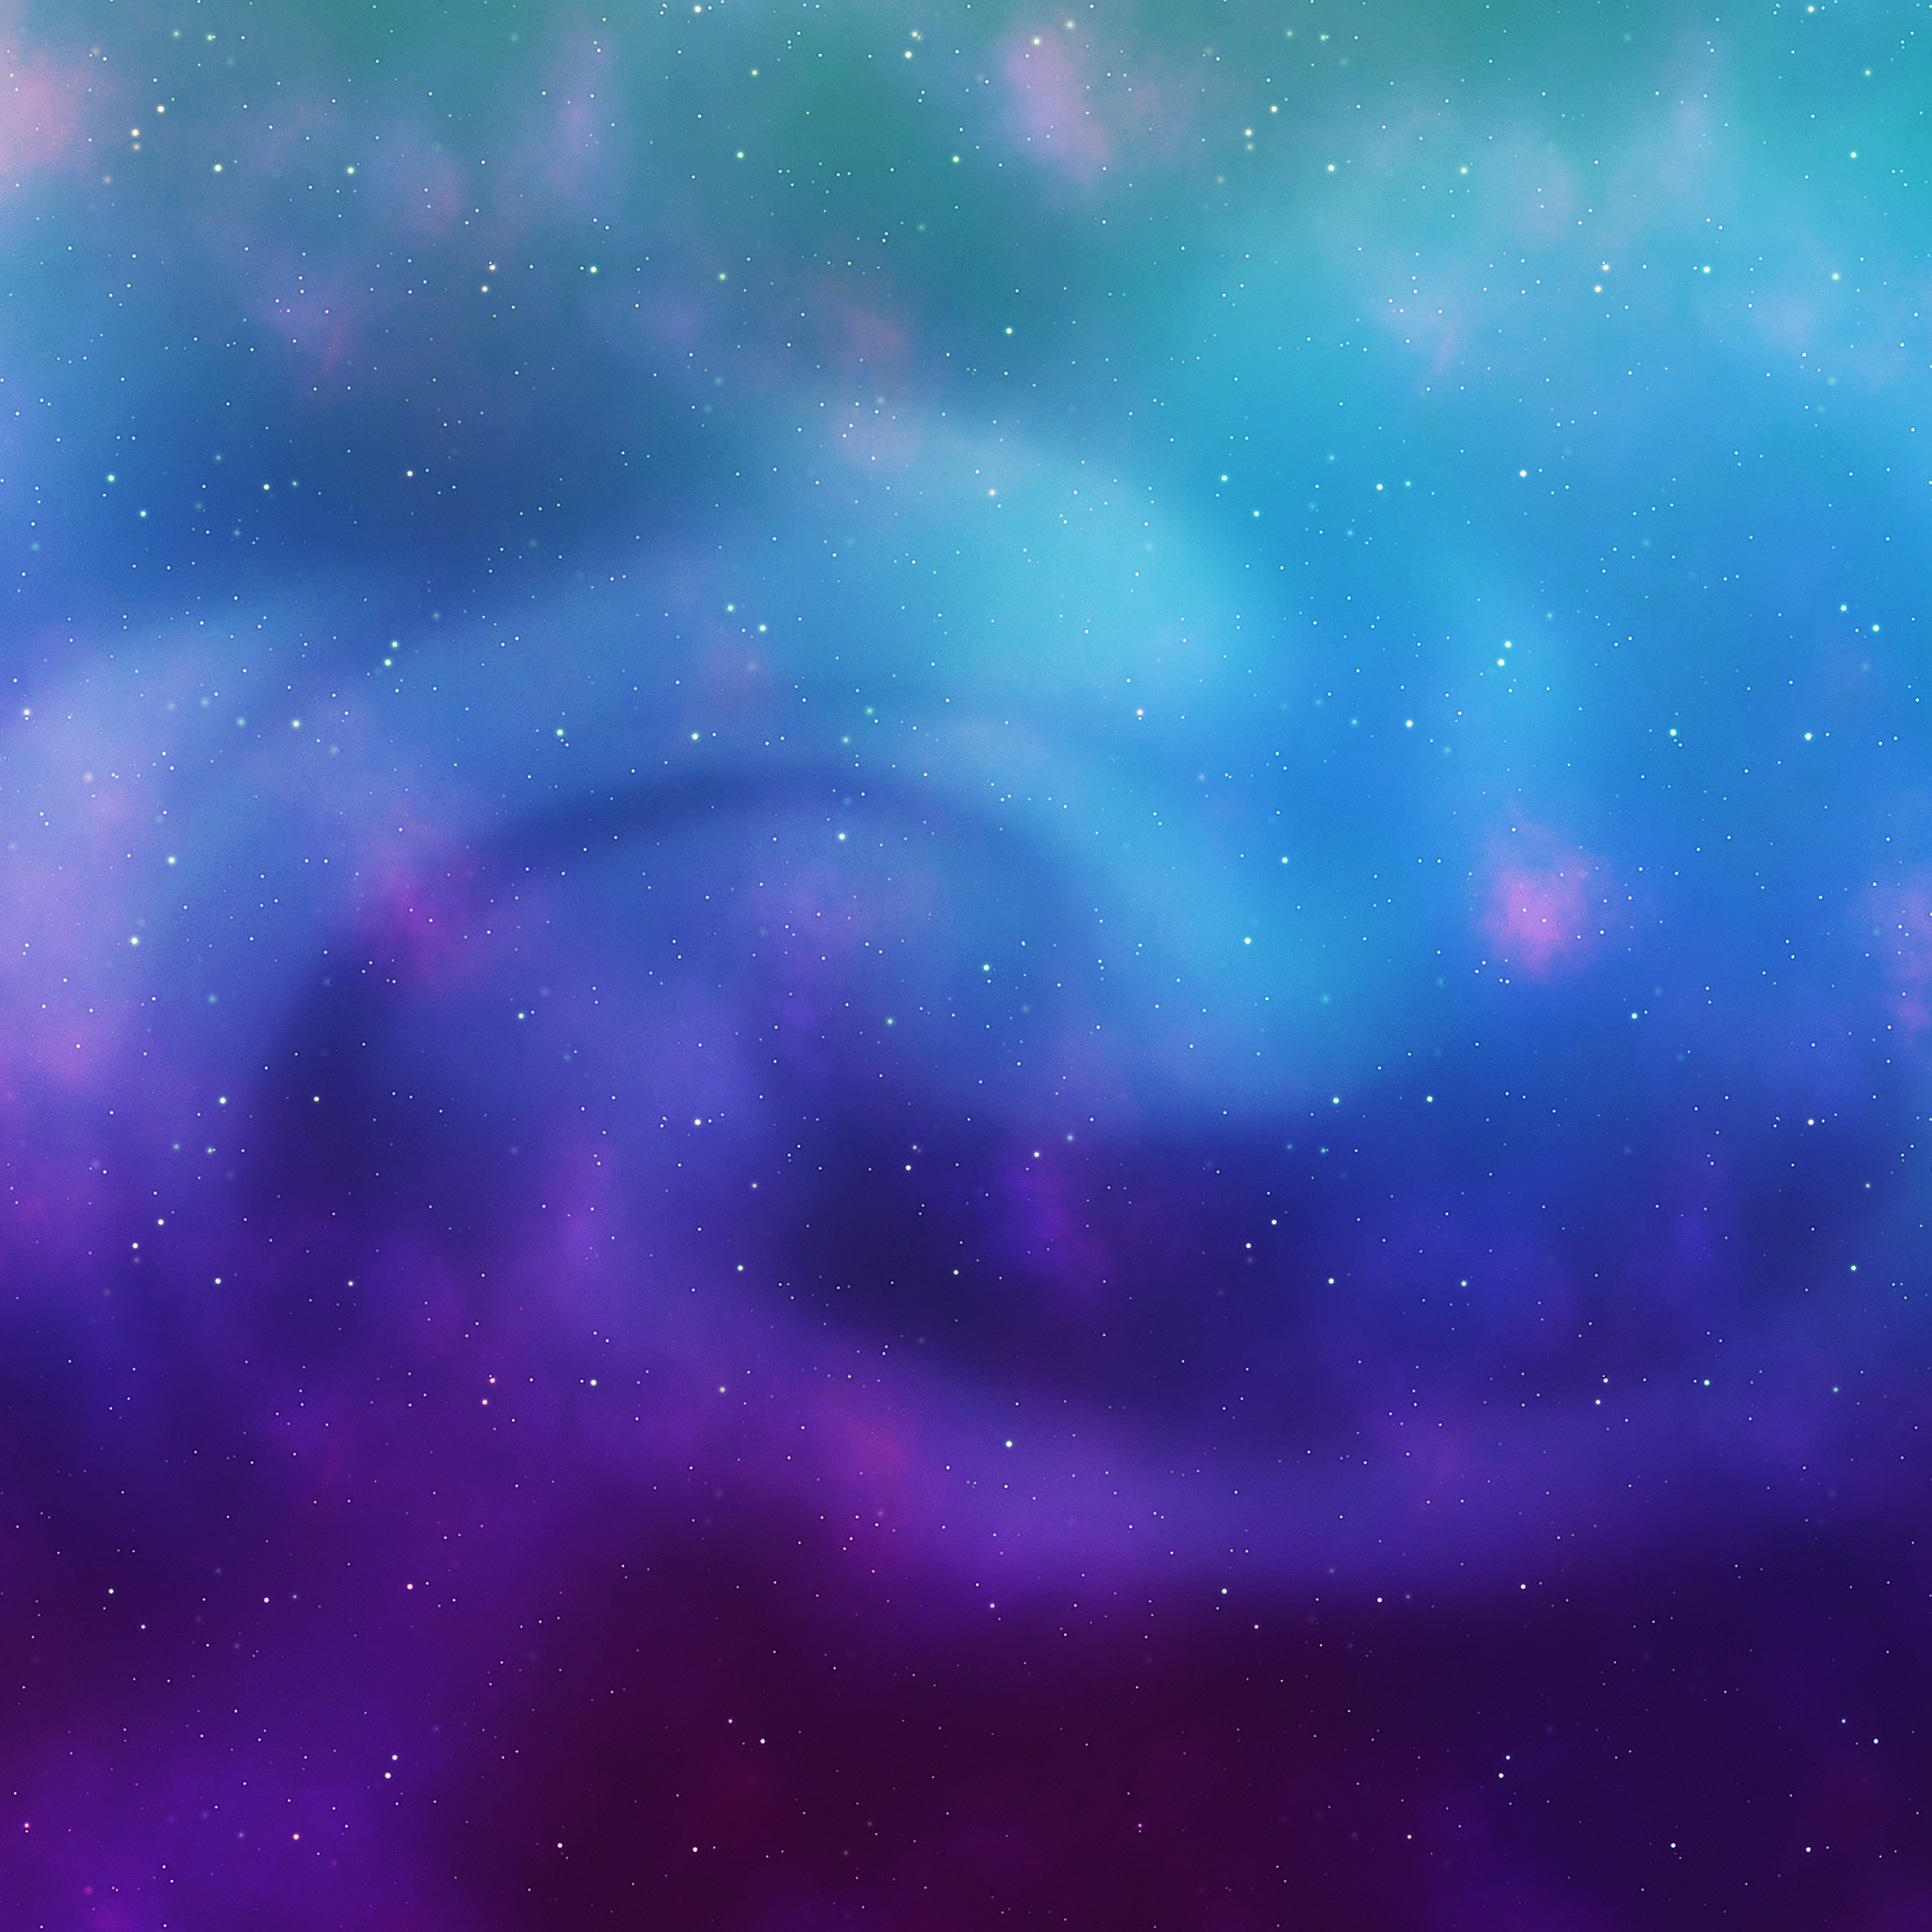 Expansive Space Wallpaper For iPhone iPad And Desktop